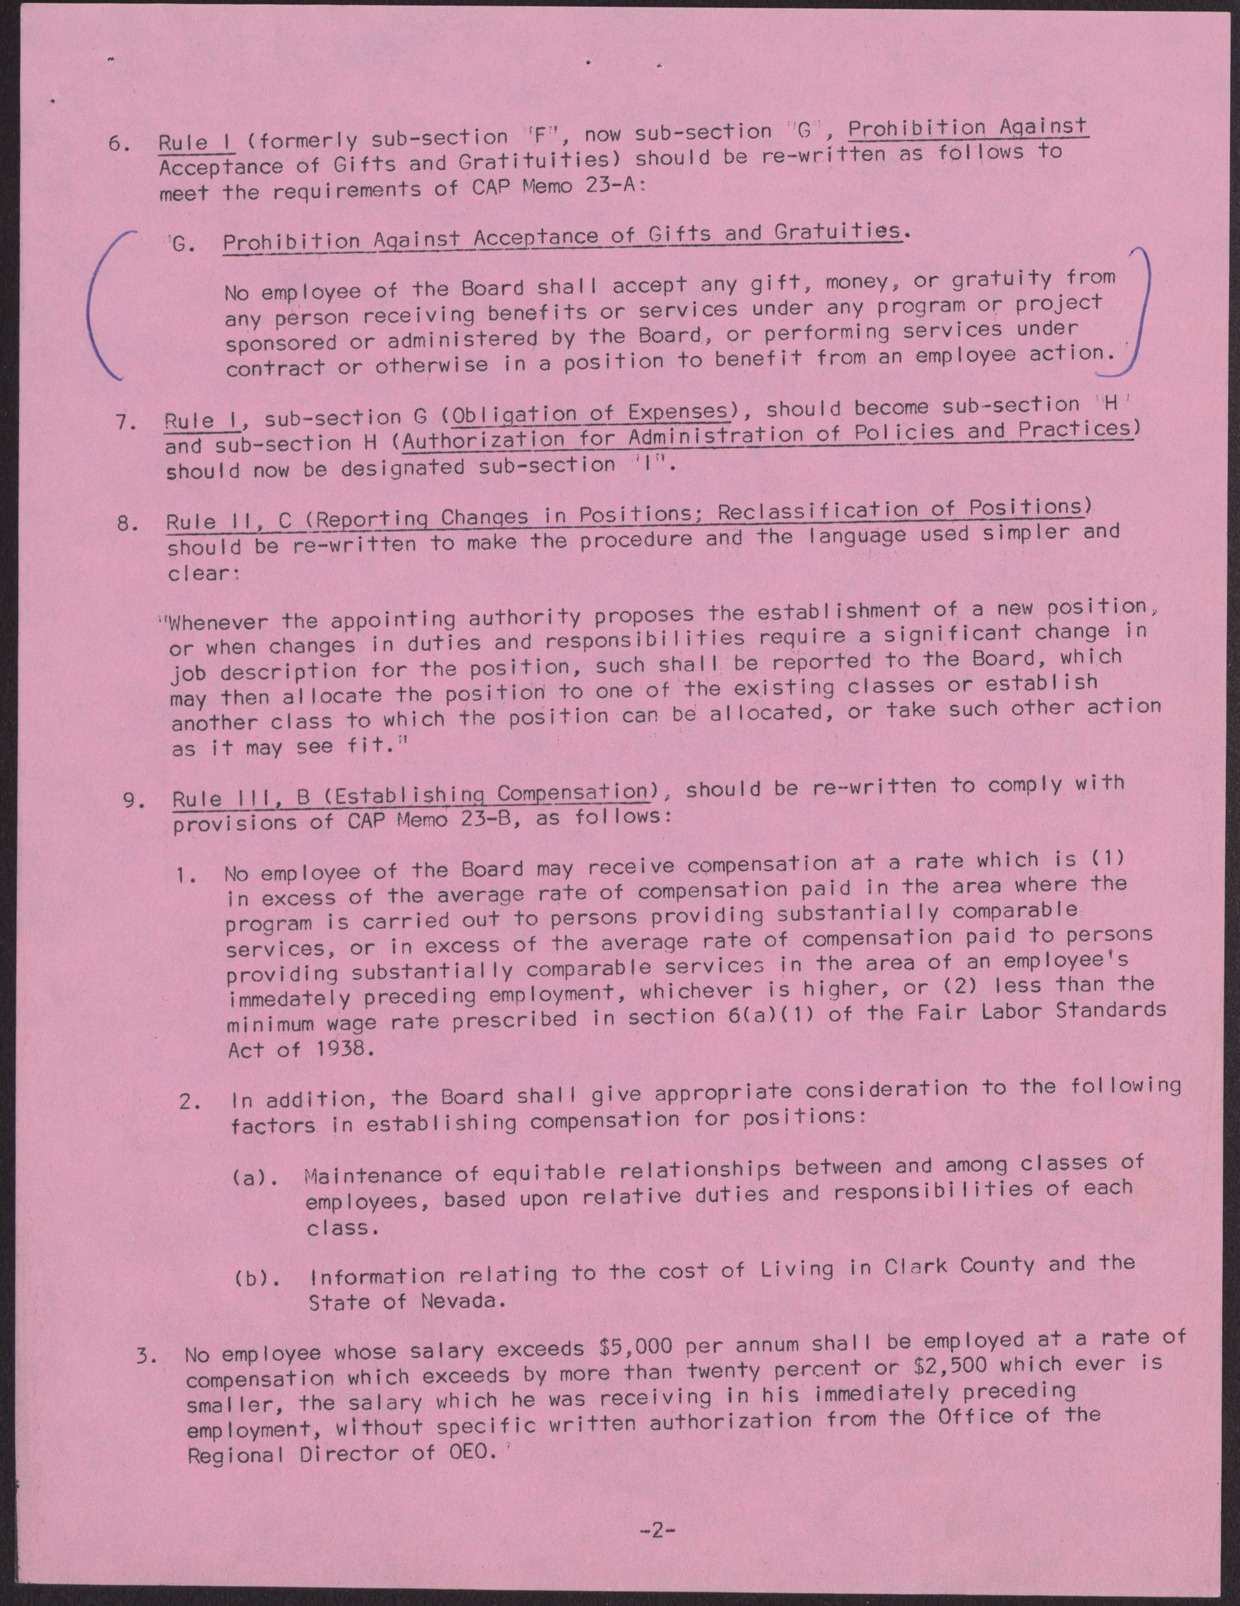 Recommendations for Changes in Personnel Policies and Practices (6 pages), May 15, 1967, page 2